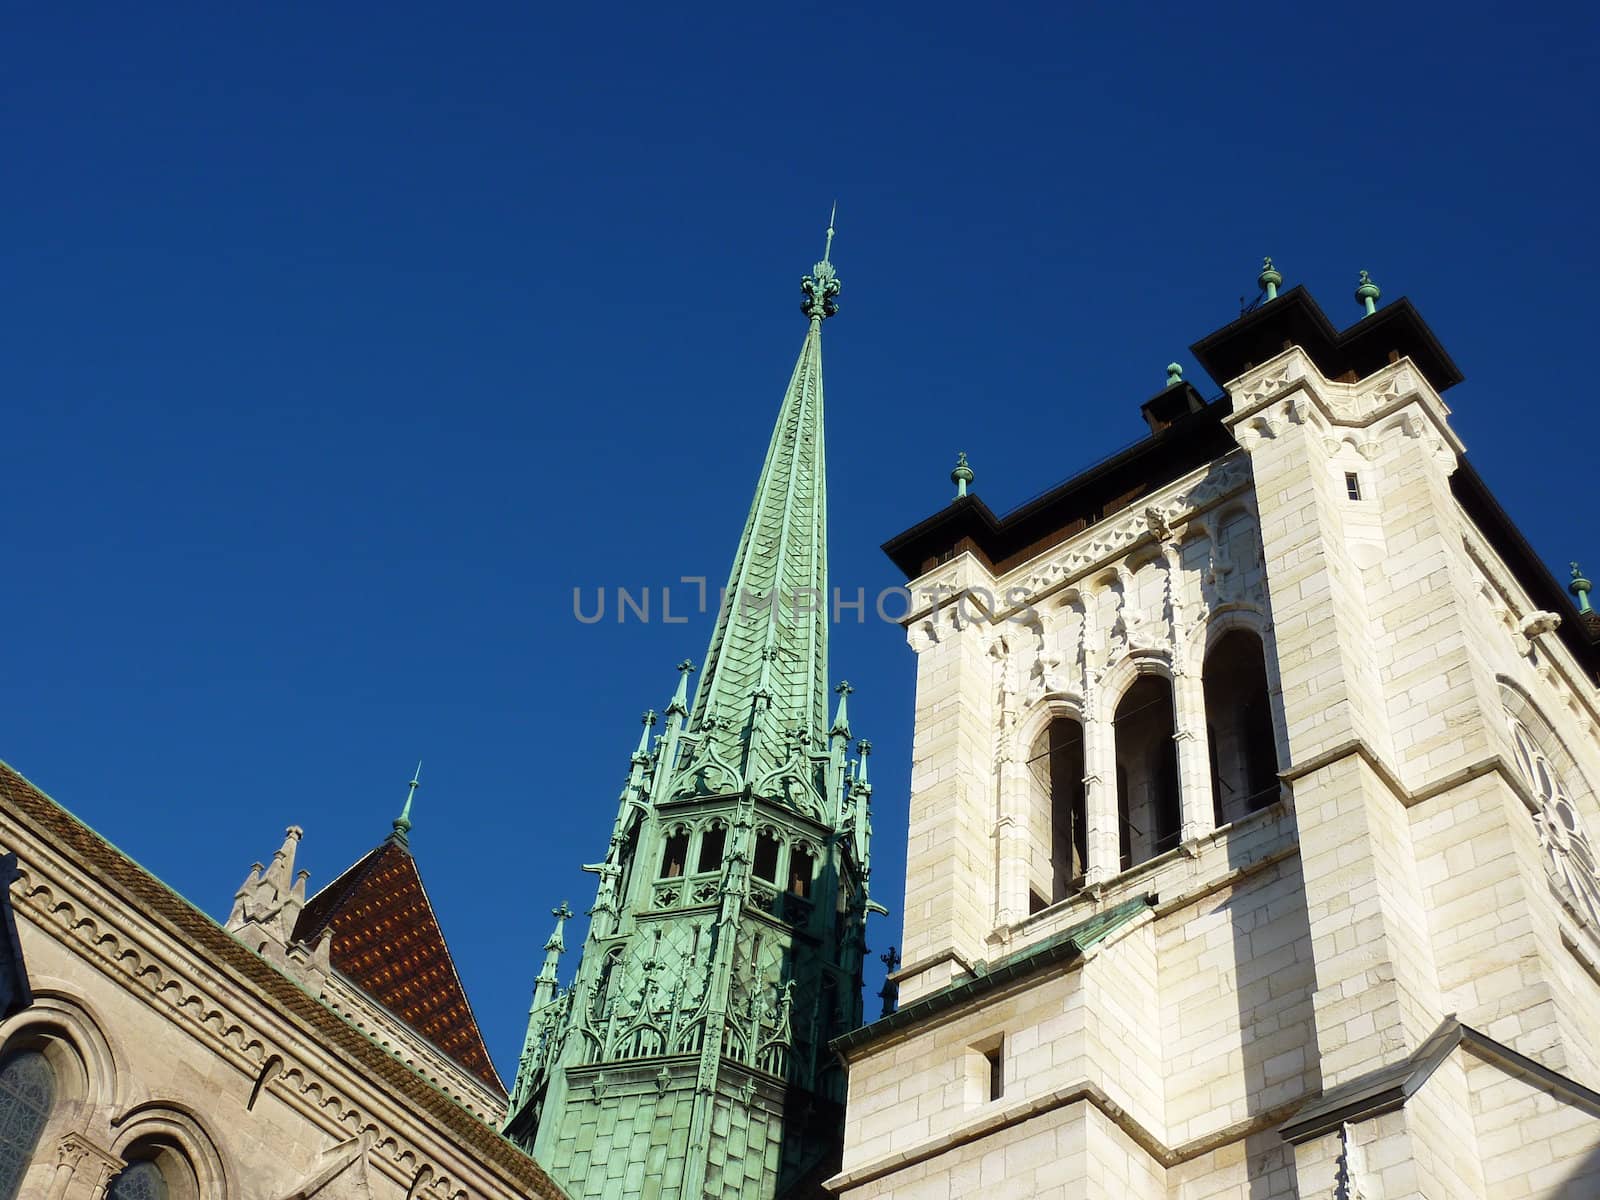 Green bell-tower of Saint-Pierre's cathedral in Geneva, Switzerland surrounded by old constructions